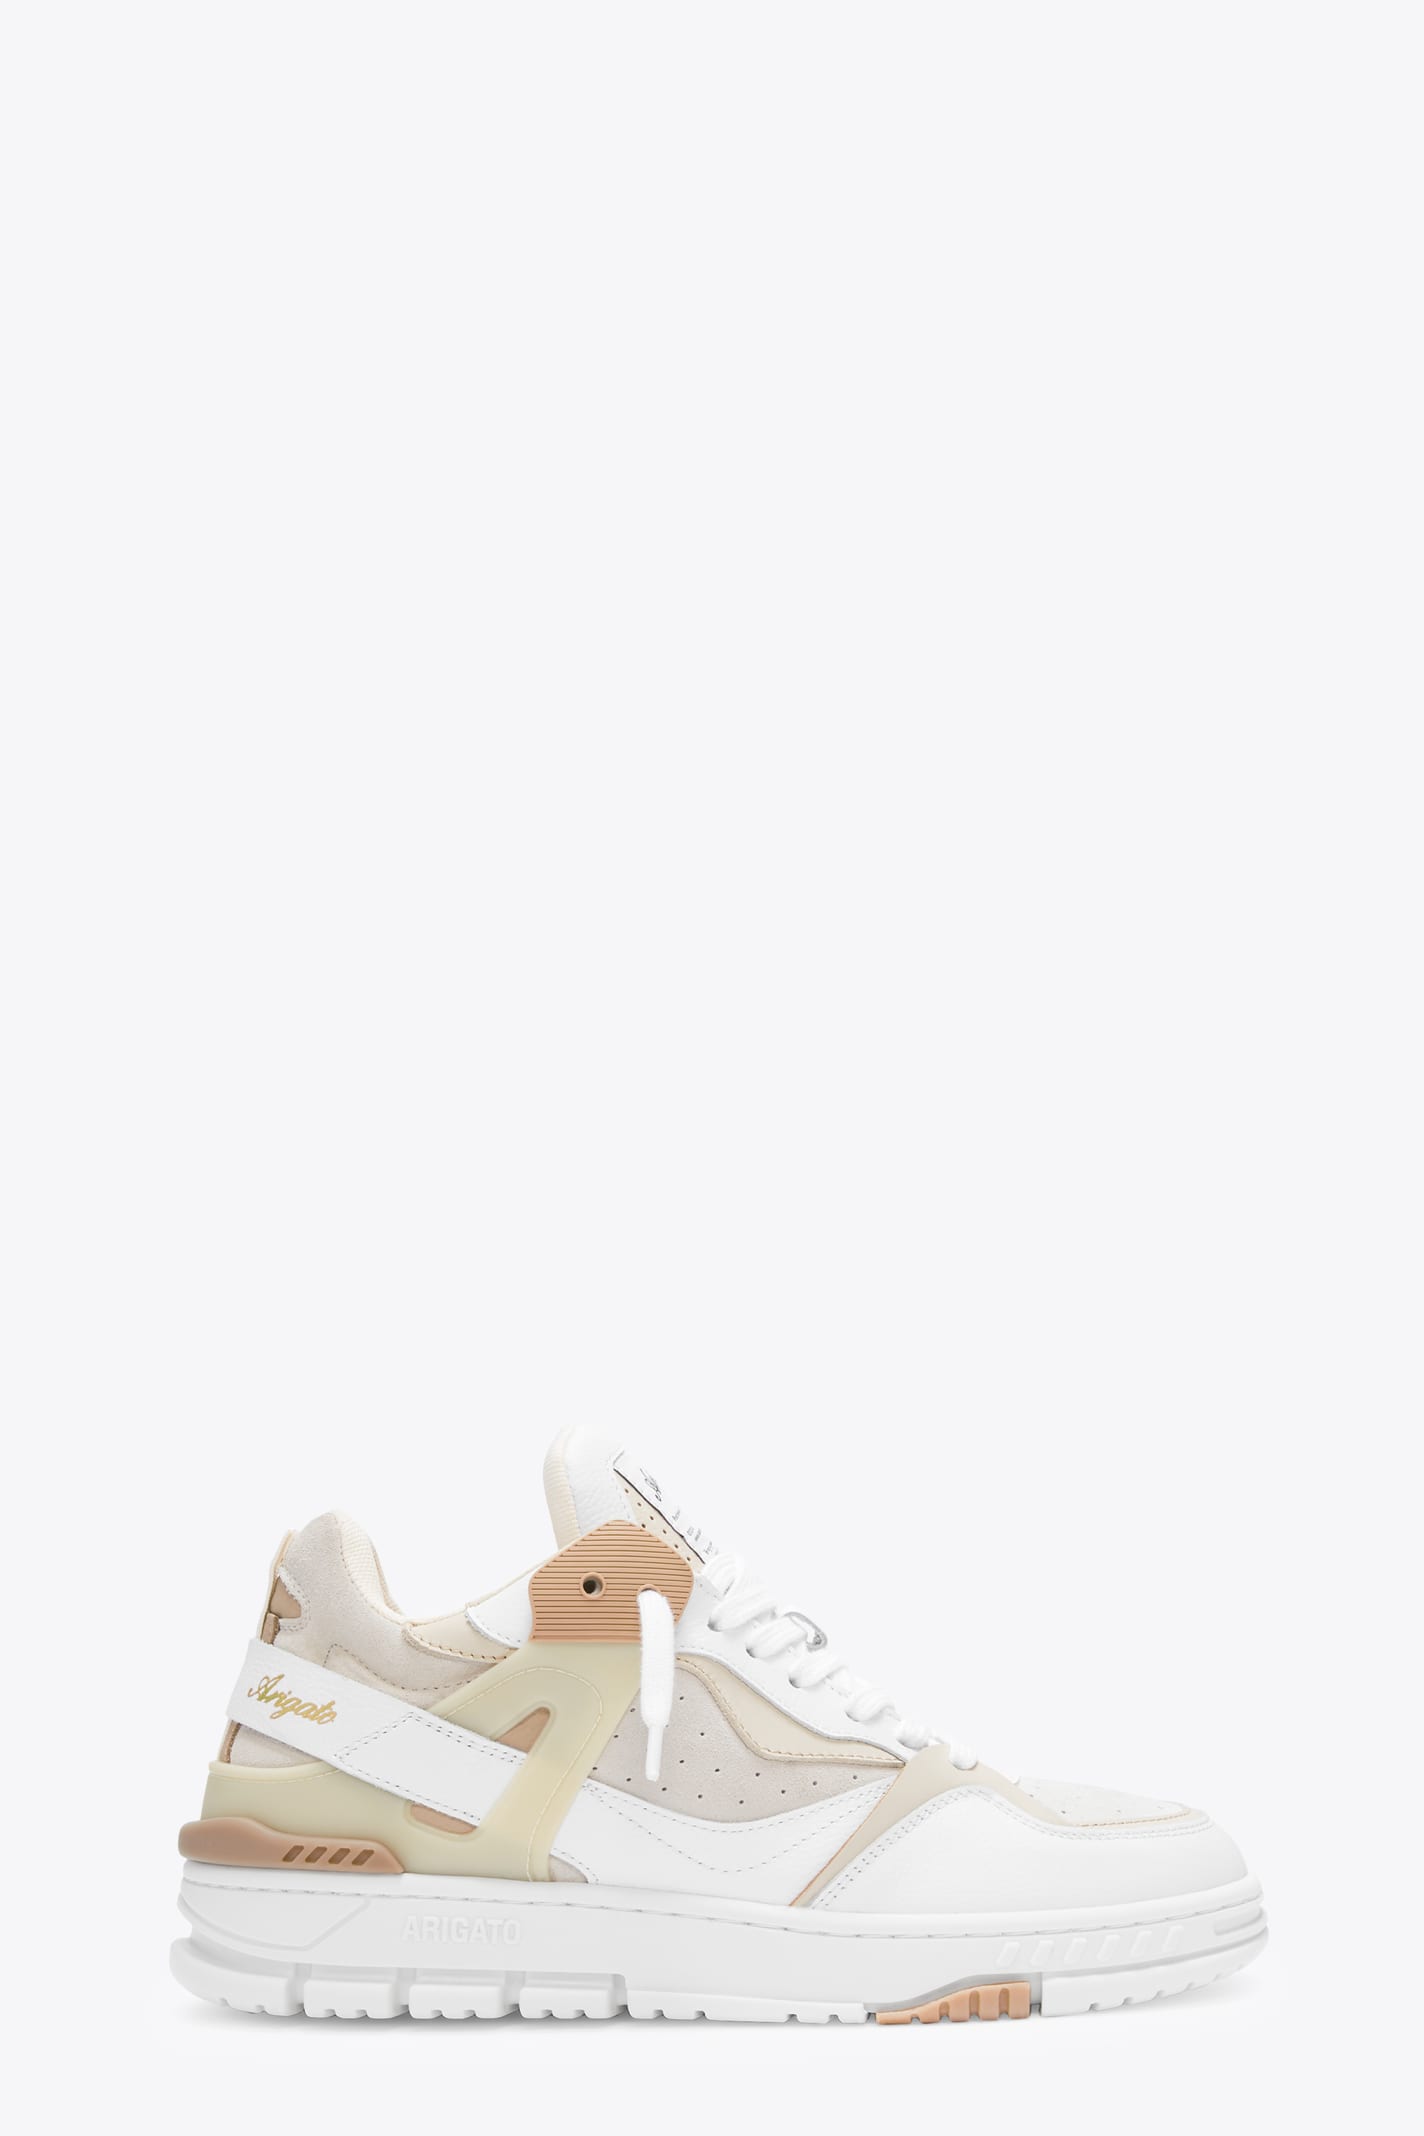 Shop Axel Arigato Astro Sneaker White And Beige Leather 90s Style Low Sneaker - Astro Sneaker In Bianco/beige